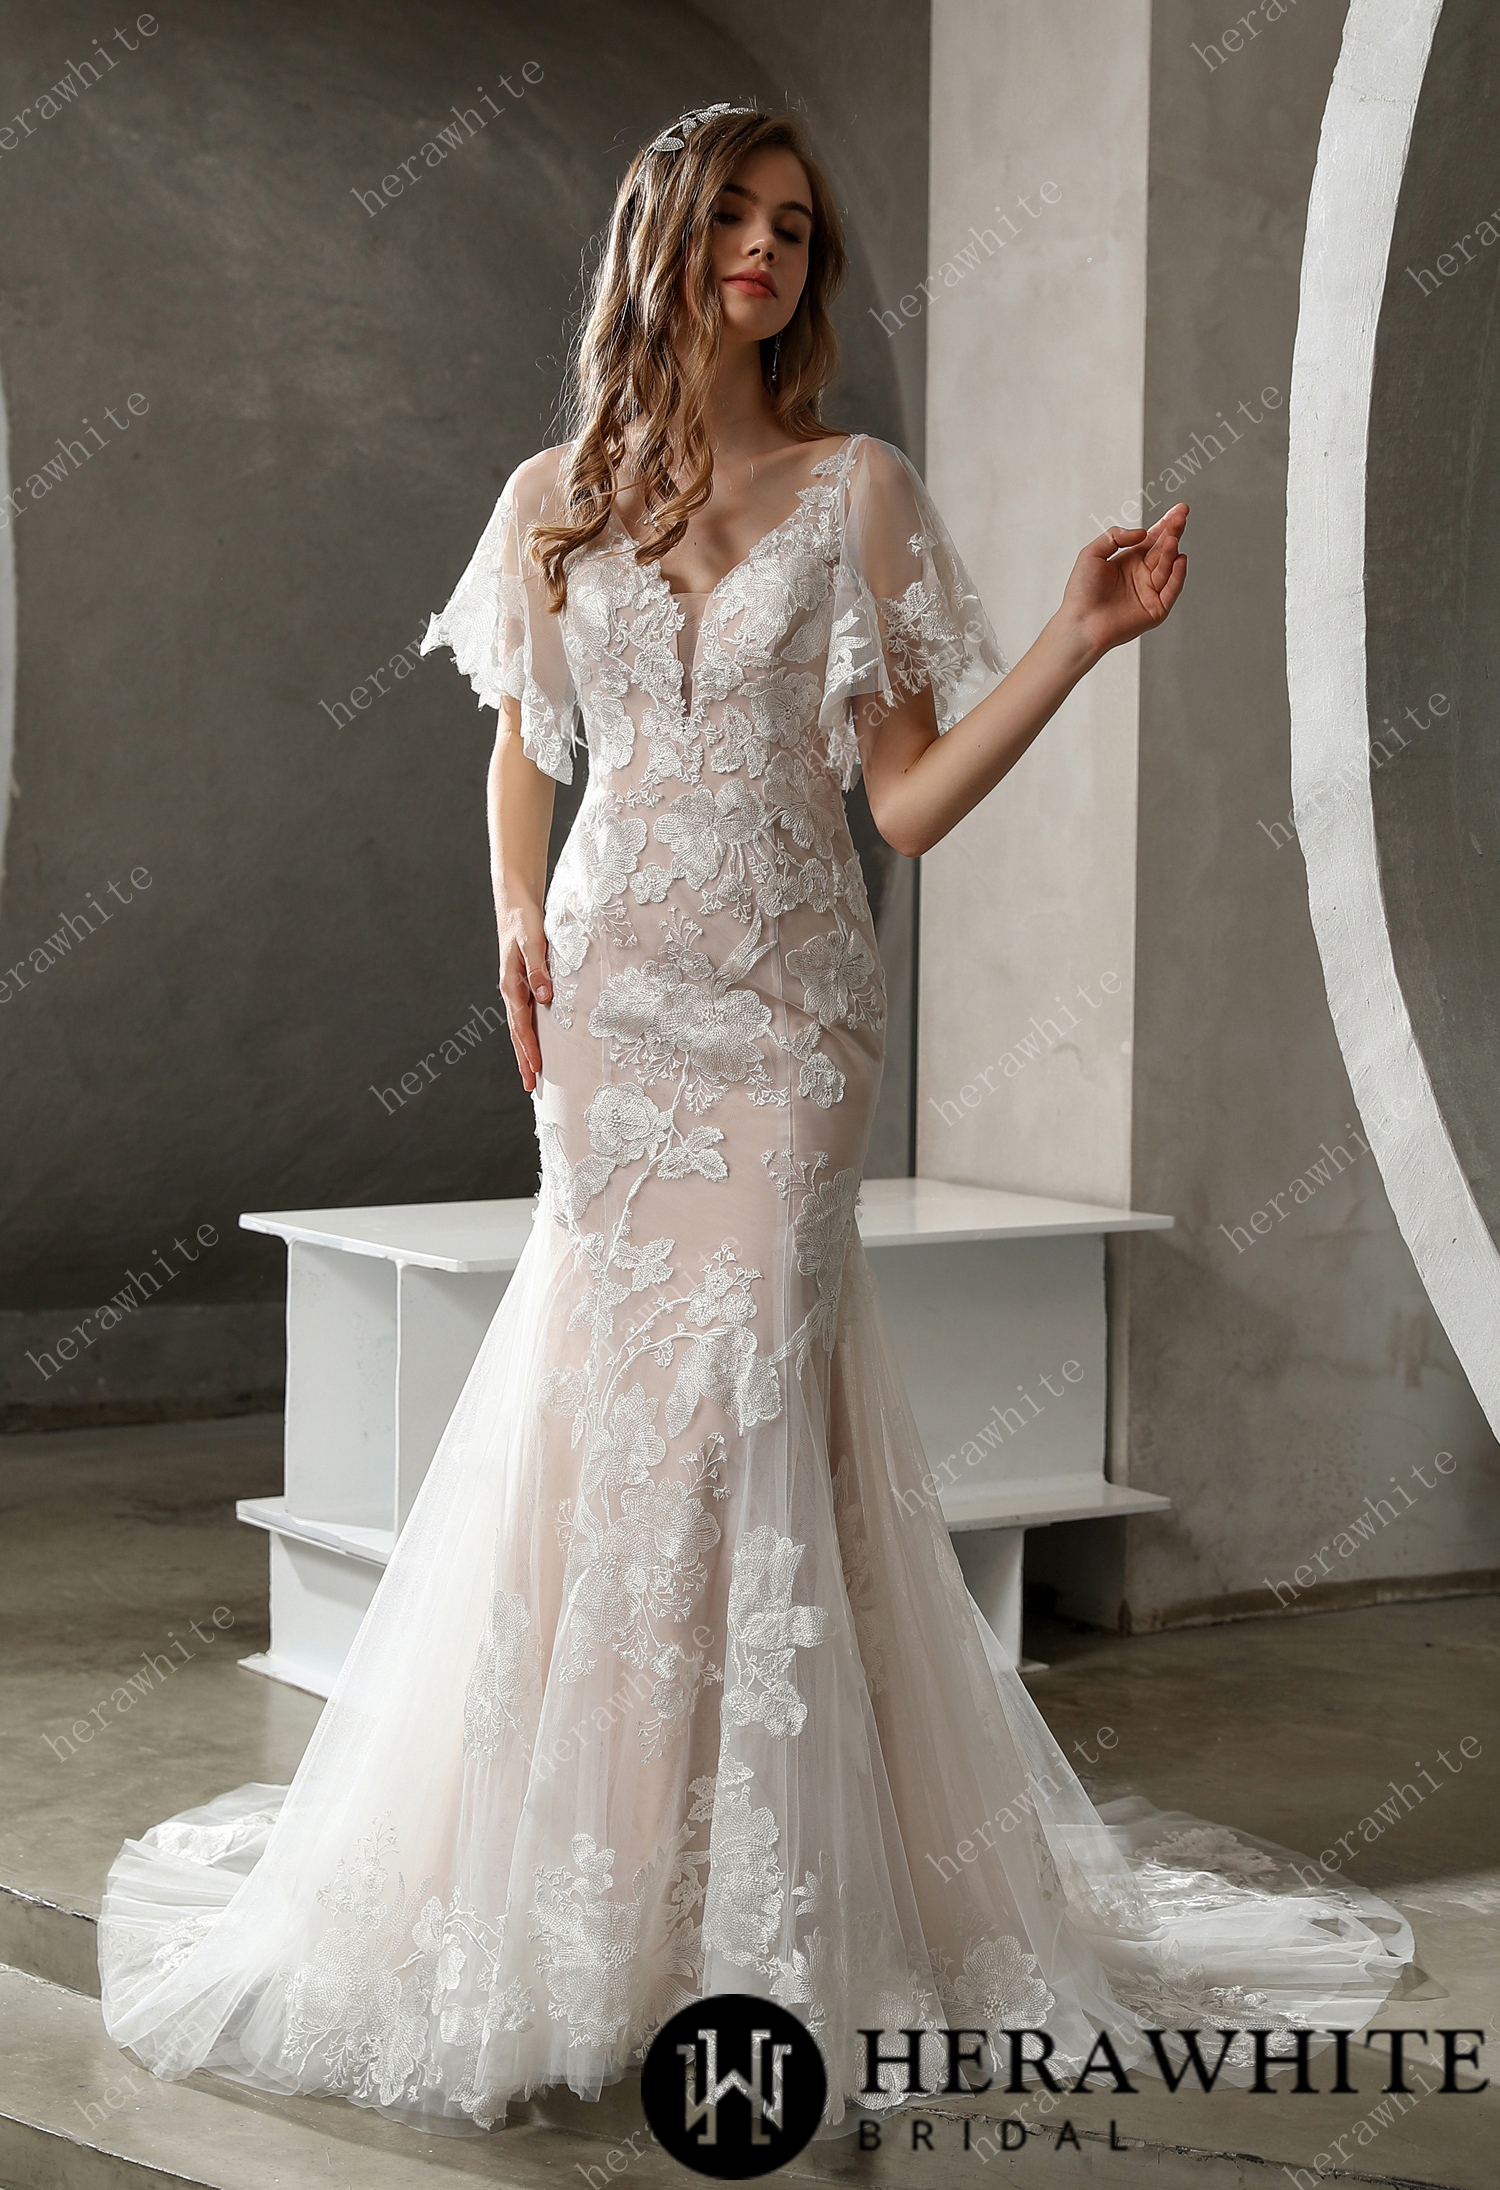 Floral Lace Plunging V-neck Bridal Gown with Flutter Sleeves